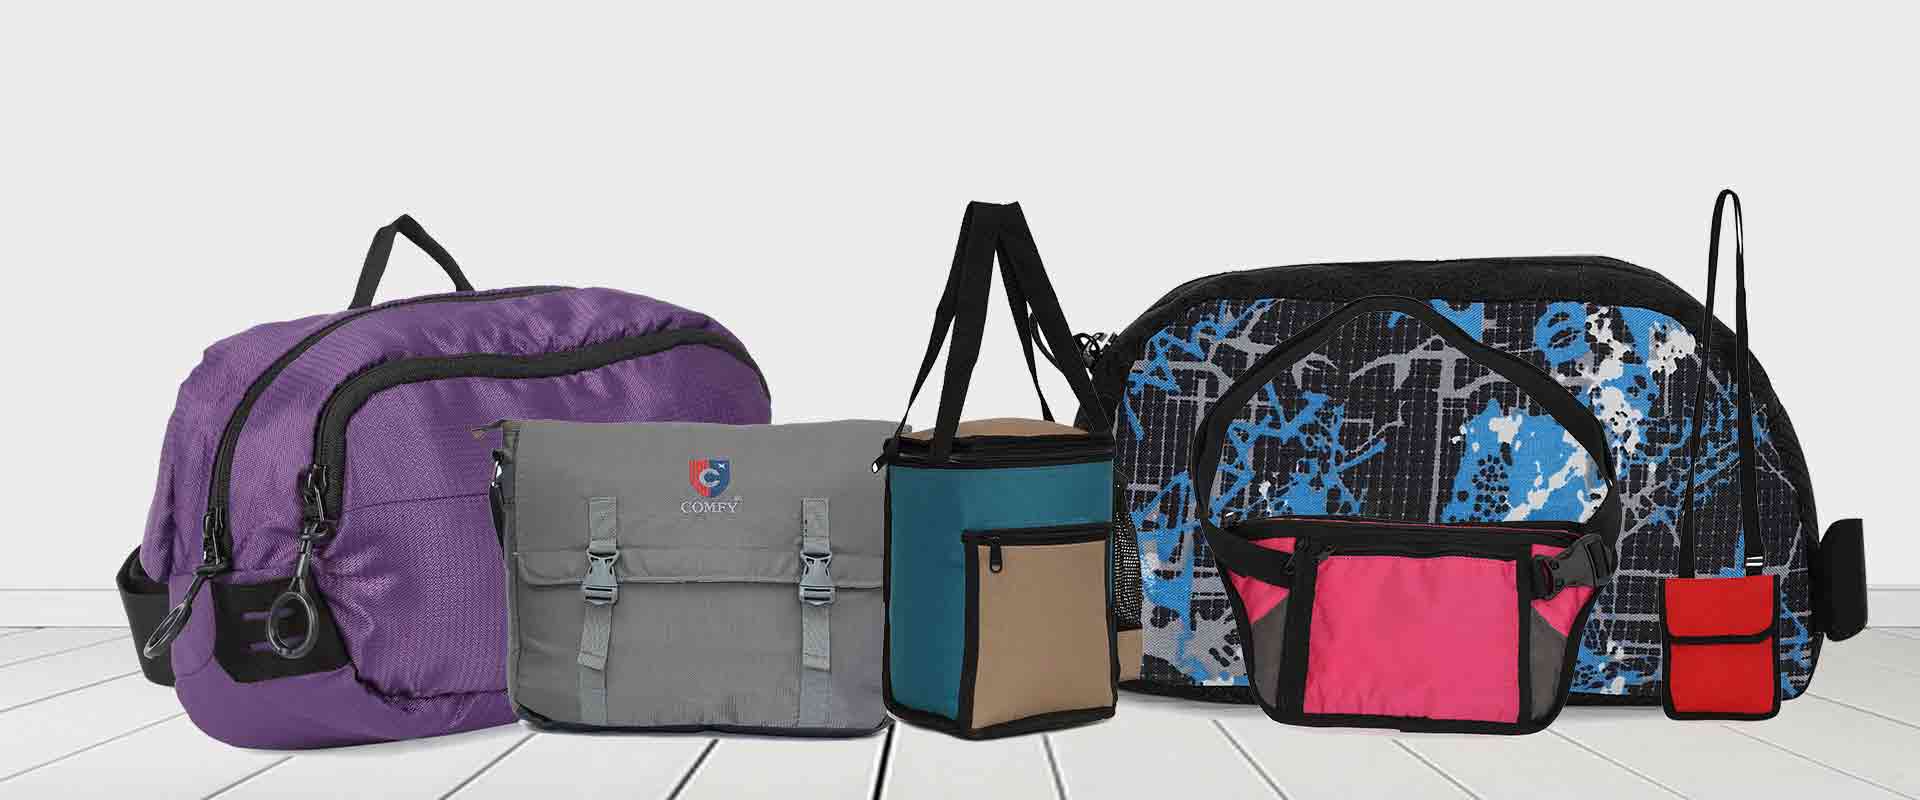 Quality, Style, Comfort and Durability <br> <h2>is encorporated in each Bag</h2>